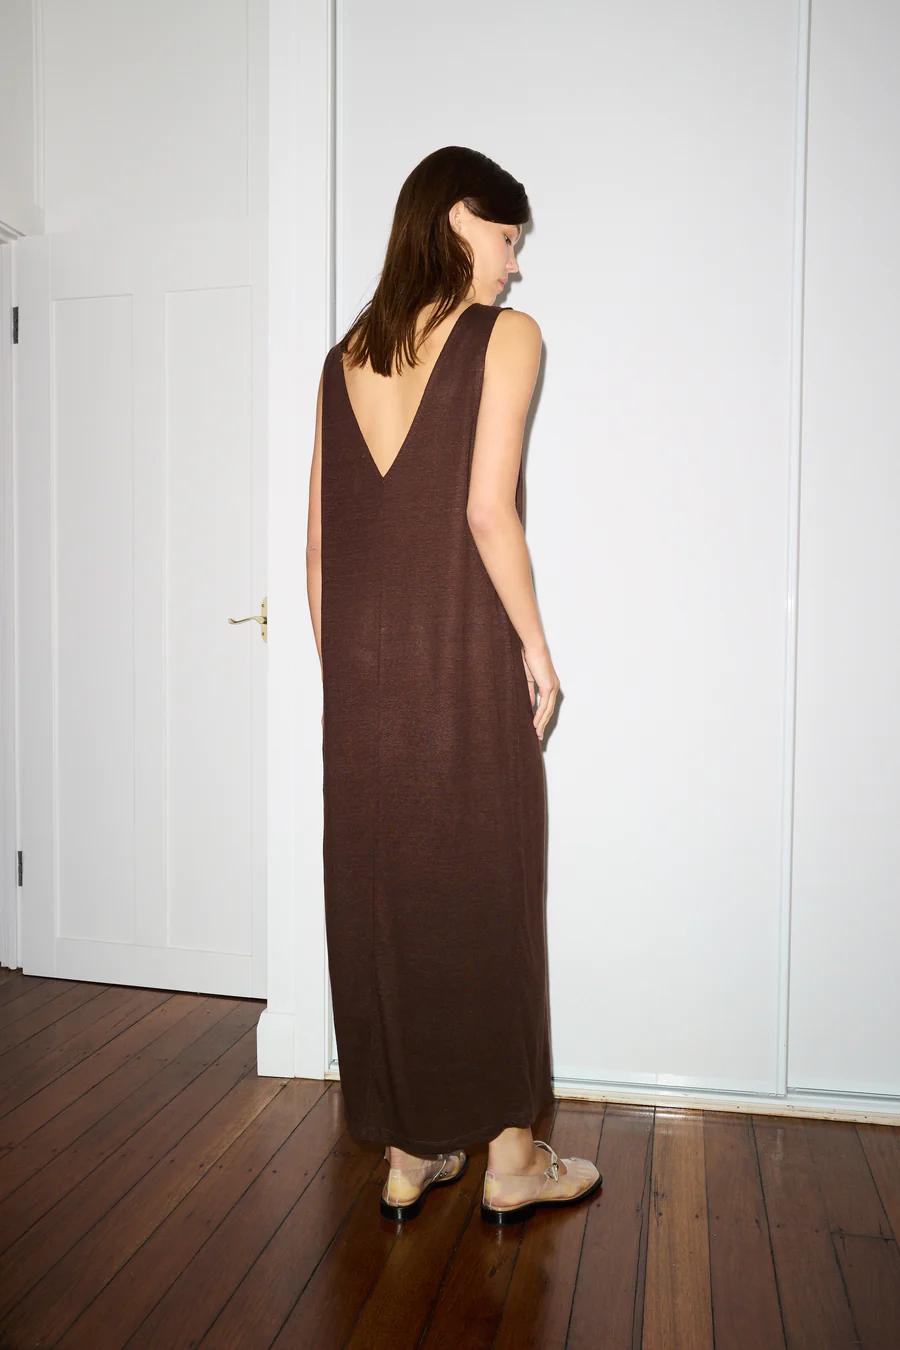 Product Image for The Soft Tank Dress, Chocolate